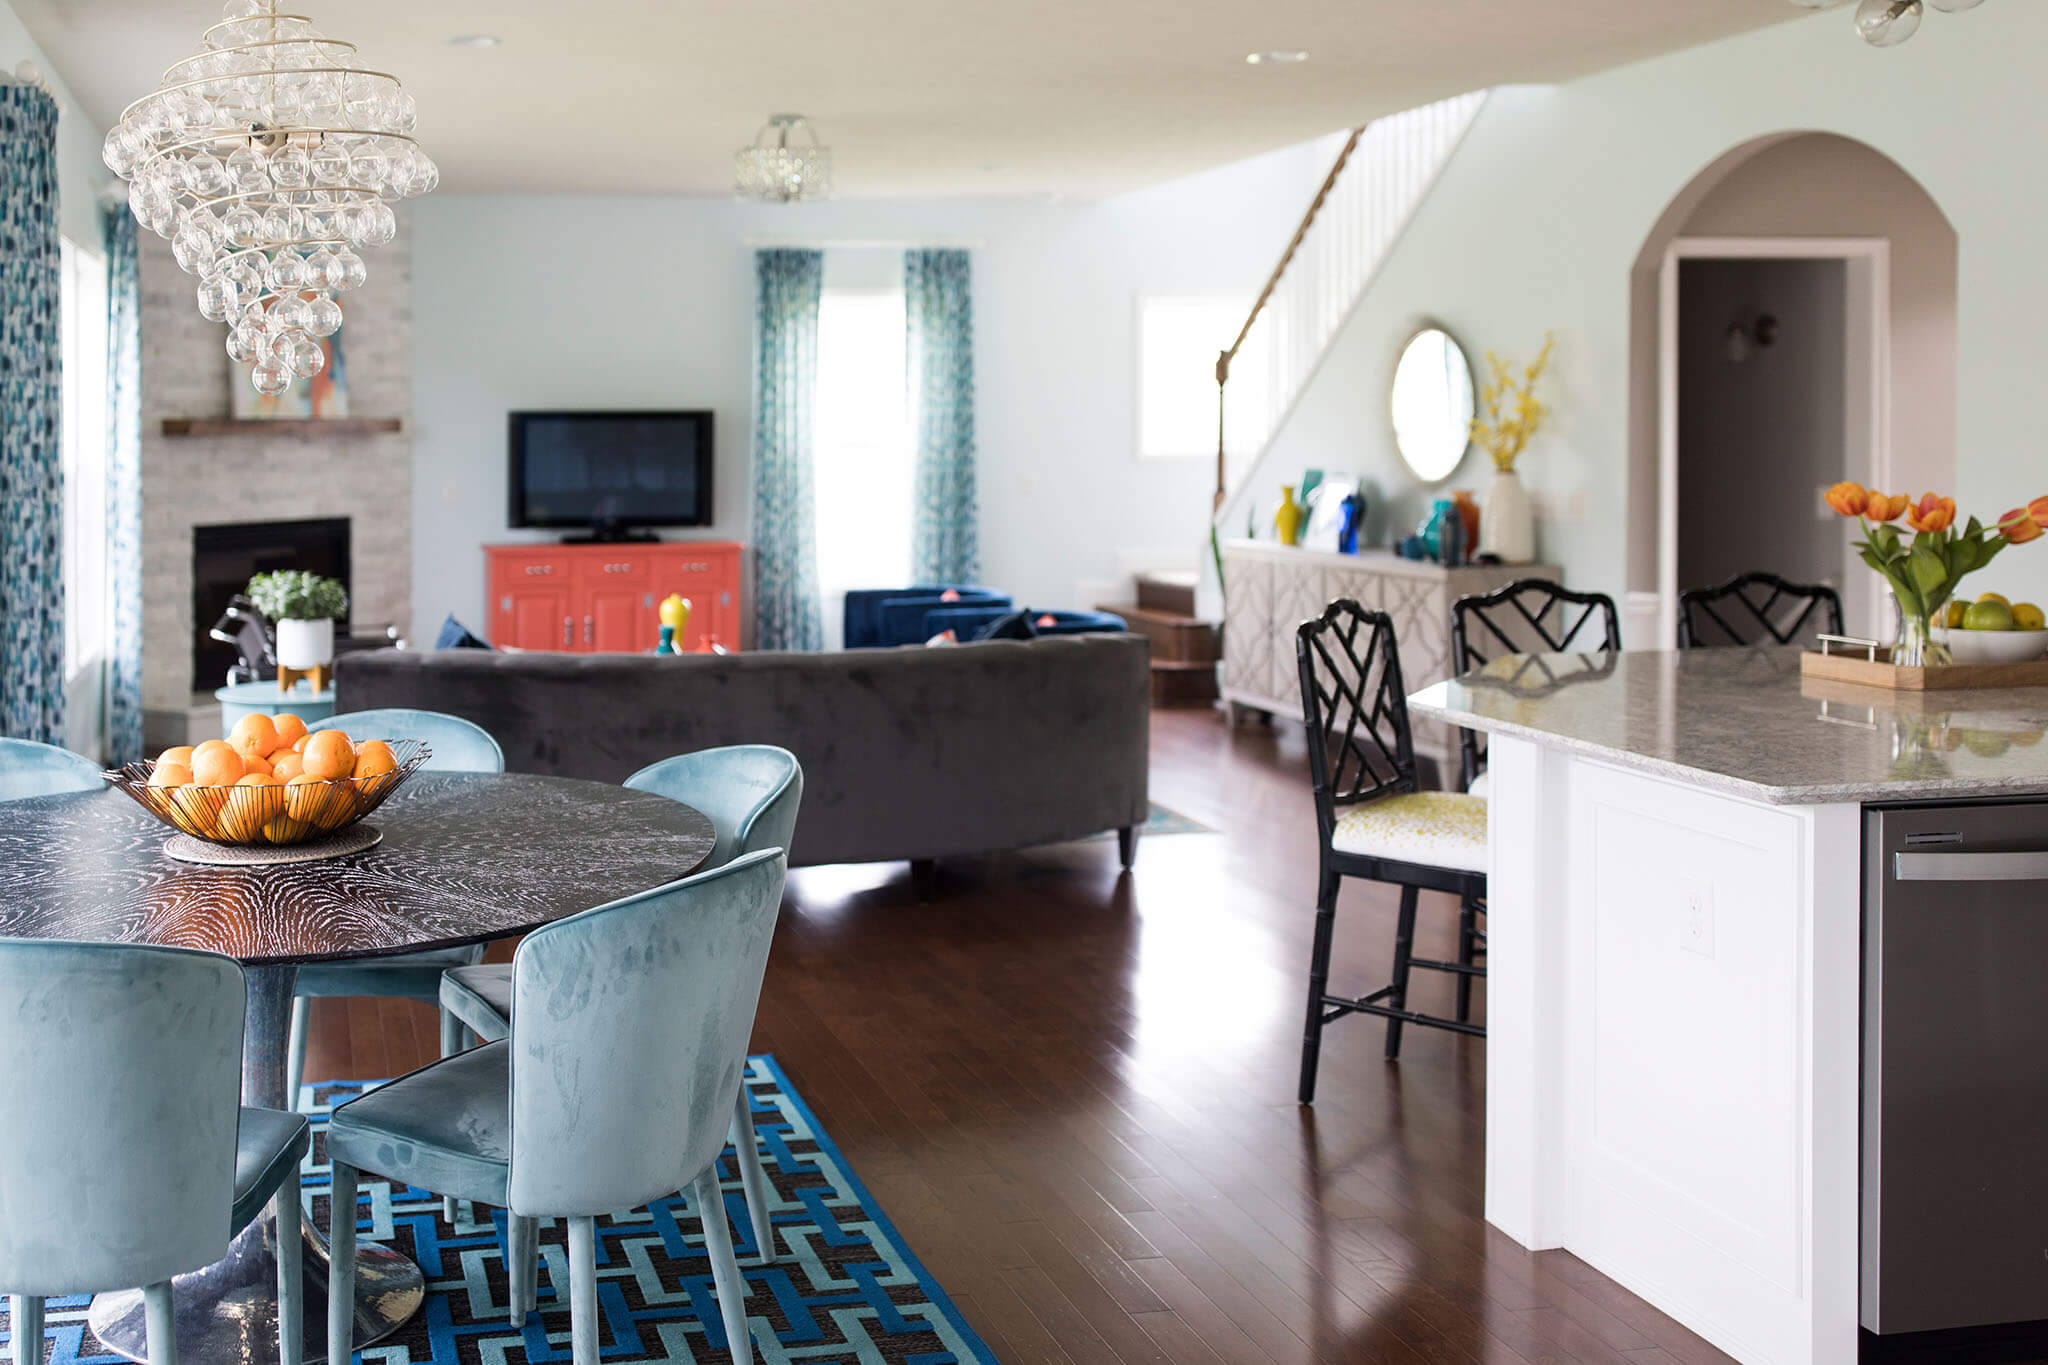 Before & After: The Colorful Contemporary Family Room